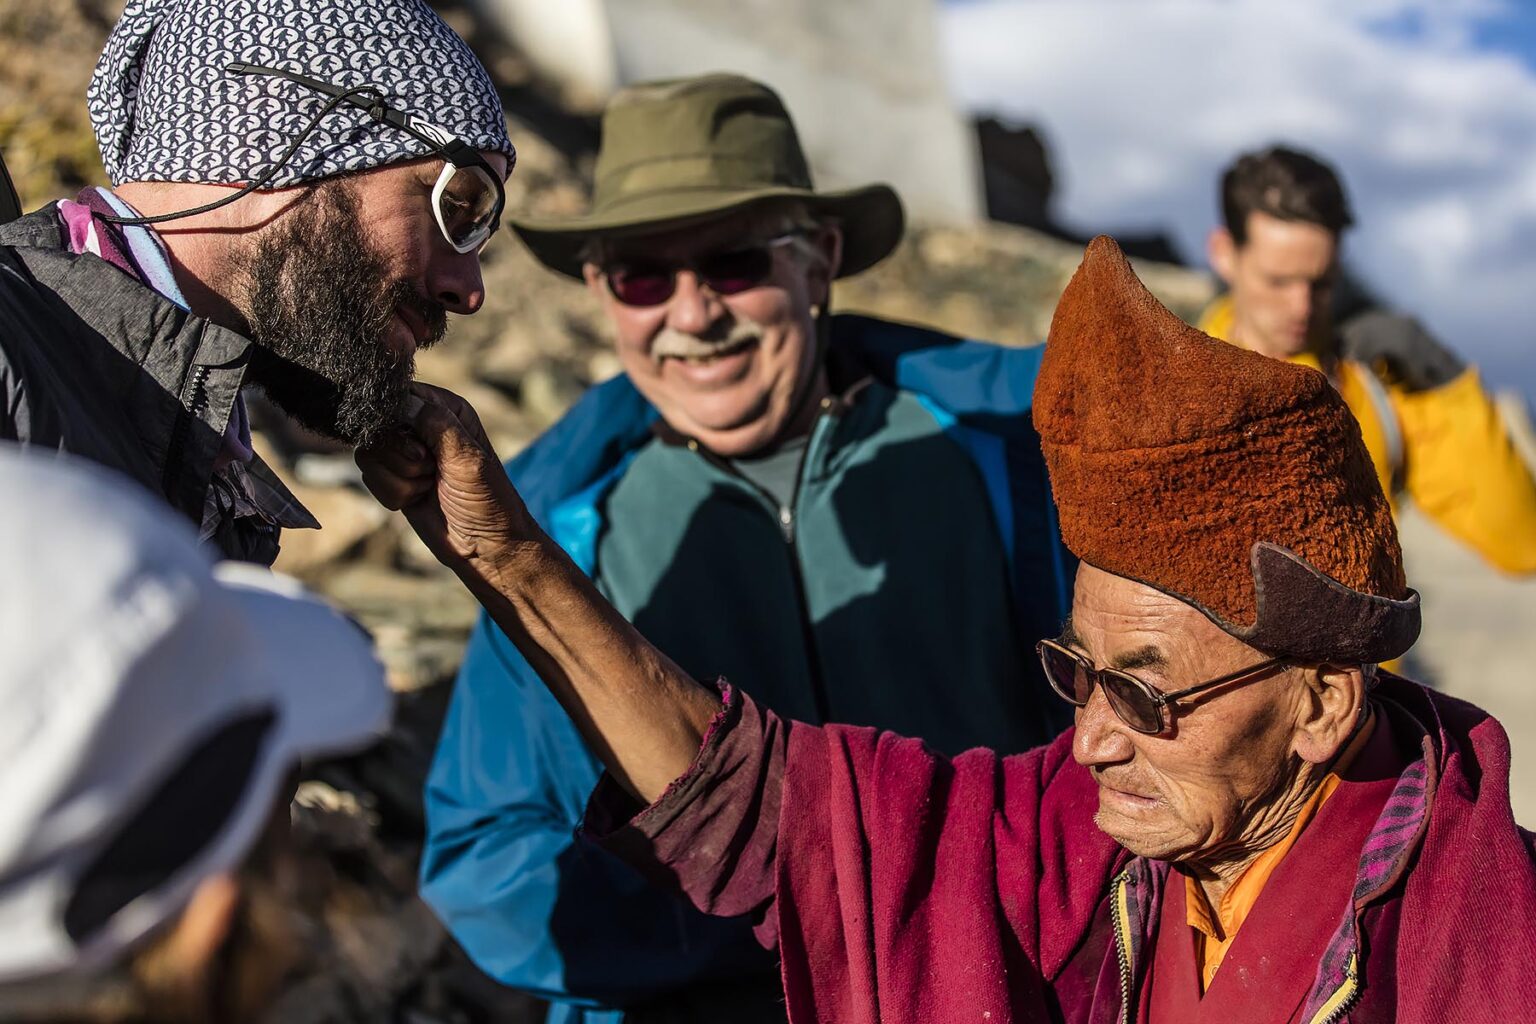 Visitors interact with a BUDDHIST MONK at KARSHA GOMPA the largest Buddhist Monastery in the STOD RIVER VALLEY - ZANSKAR, LADAKH, INDIA